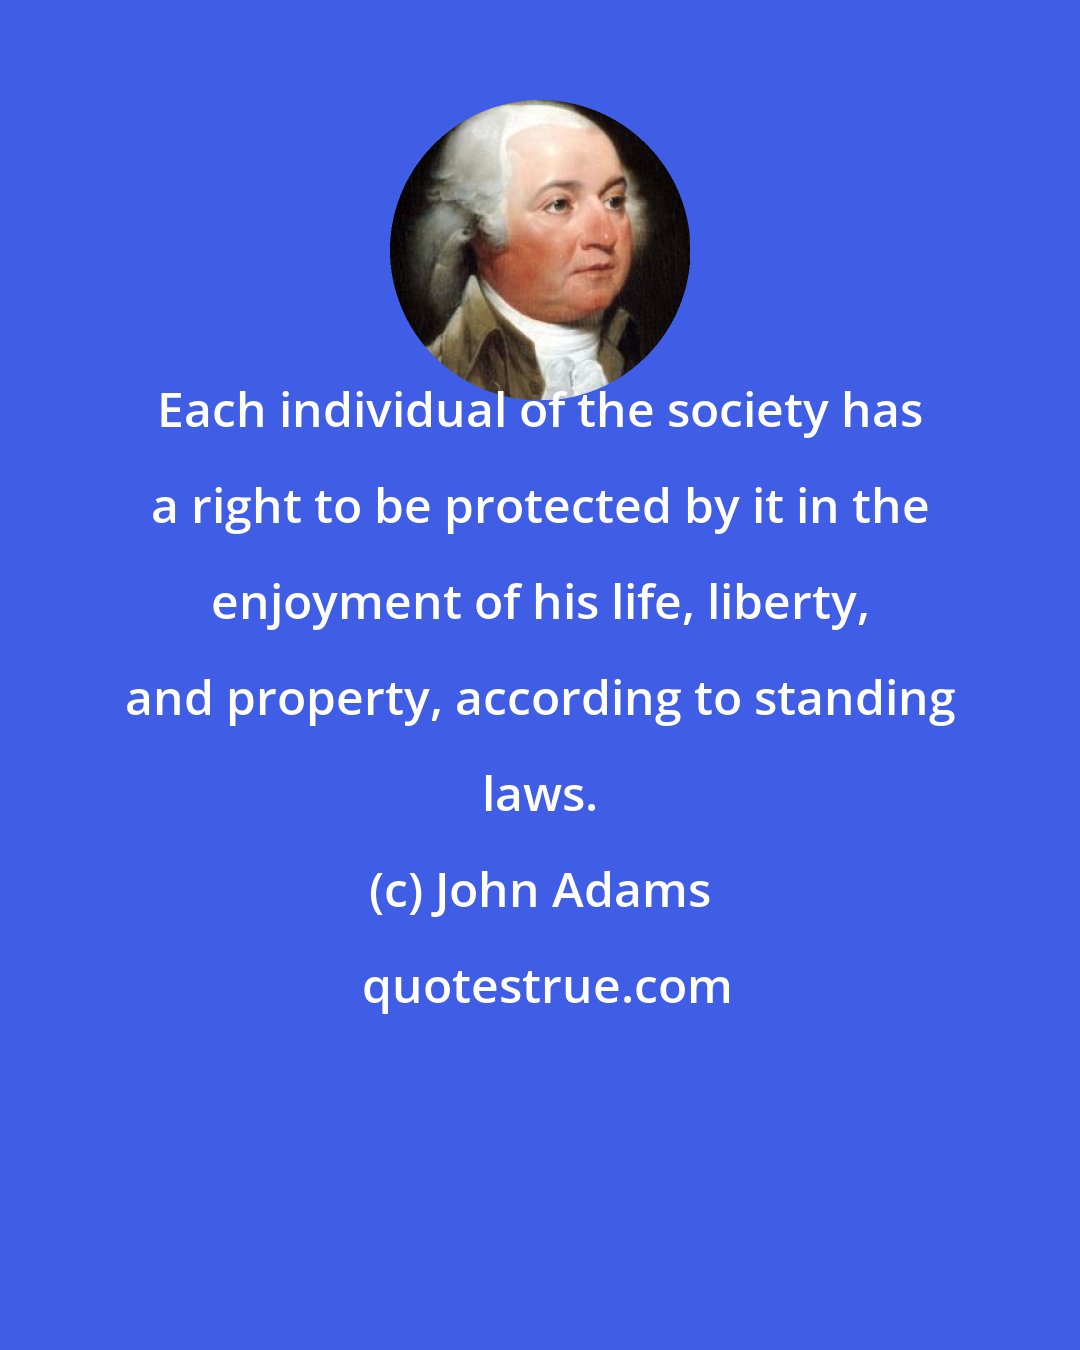 John Adams: Each individual of the society has a right to be protected by it in the enjoyment of his life, liberty, and property, according to standing laws.